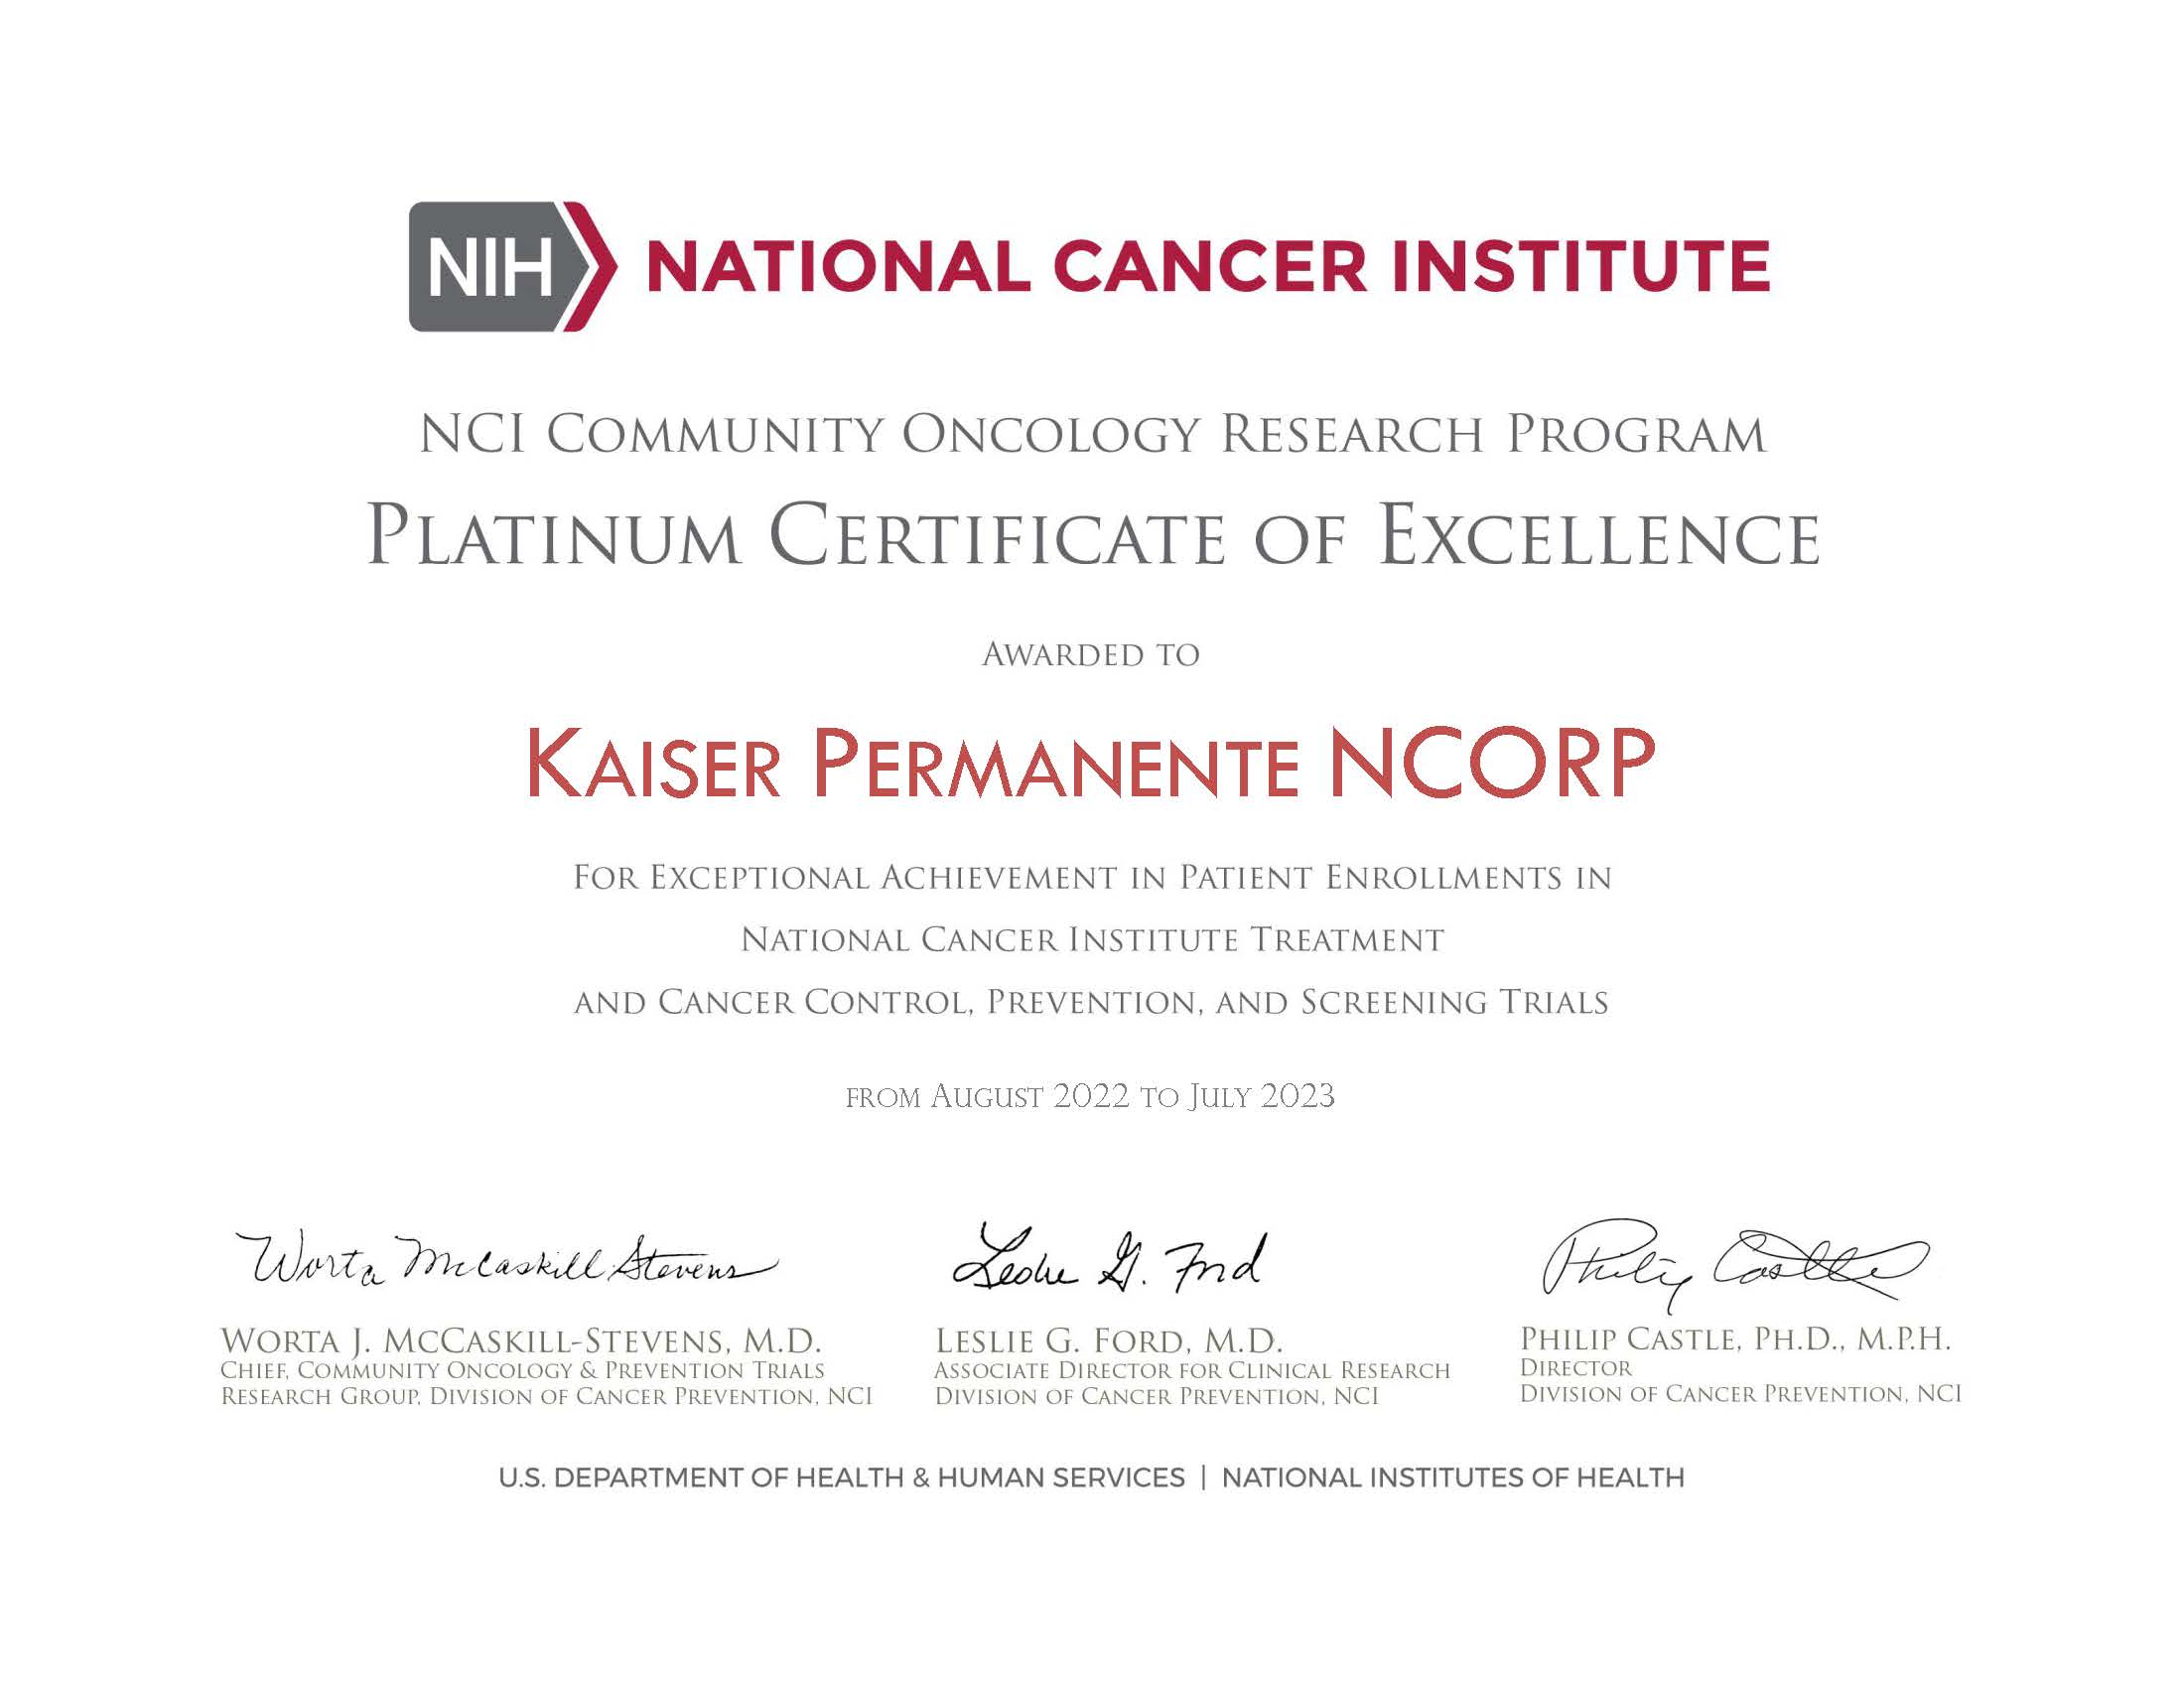 Image of the Kaiser Permanente National Cancer Institute Community Oncology Research Program (KP NCORP) NCI Community Oncology Research Program’s Platinum Certificate of Excellence for Exceptional Achievement in Patient Enrollments in National Cancer Institute Treatment and Cancer Control, Prevention, and Screening Trials, for the period of August 2022 to July 2023.